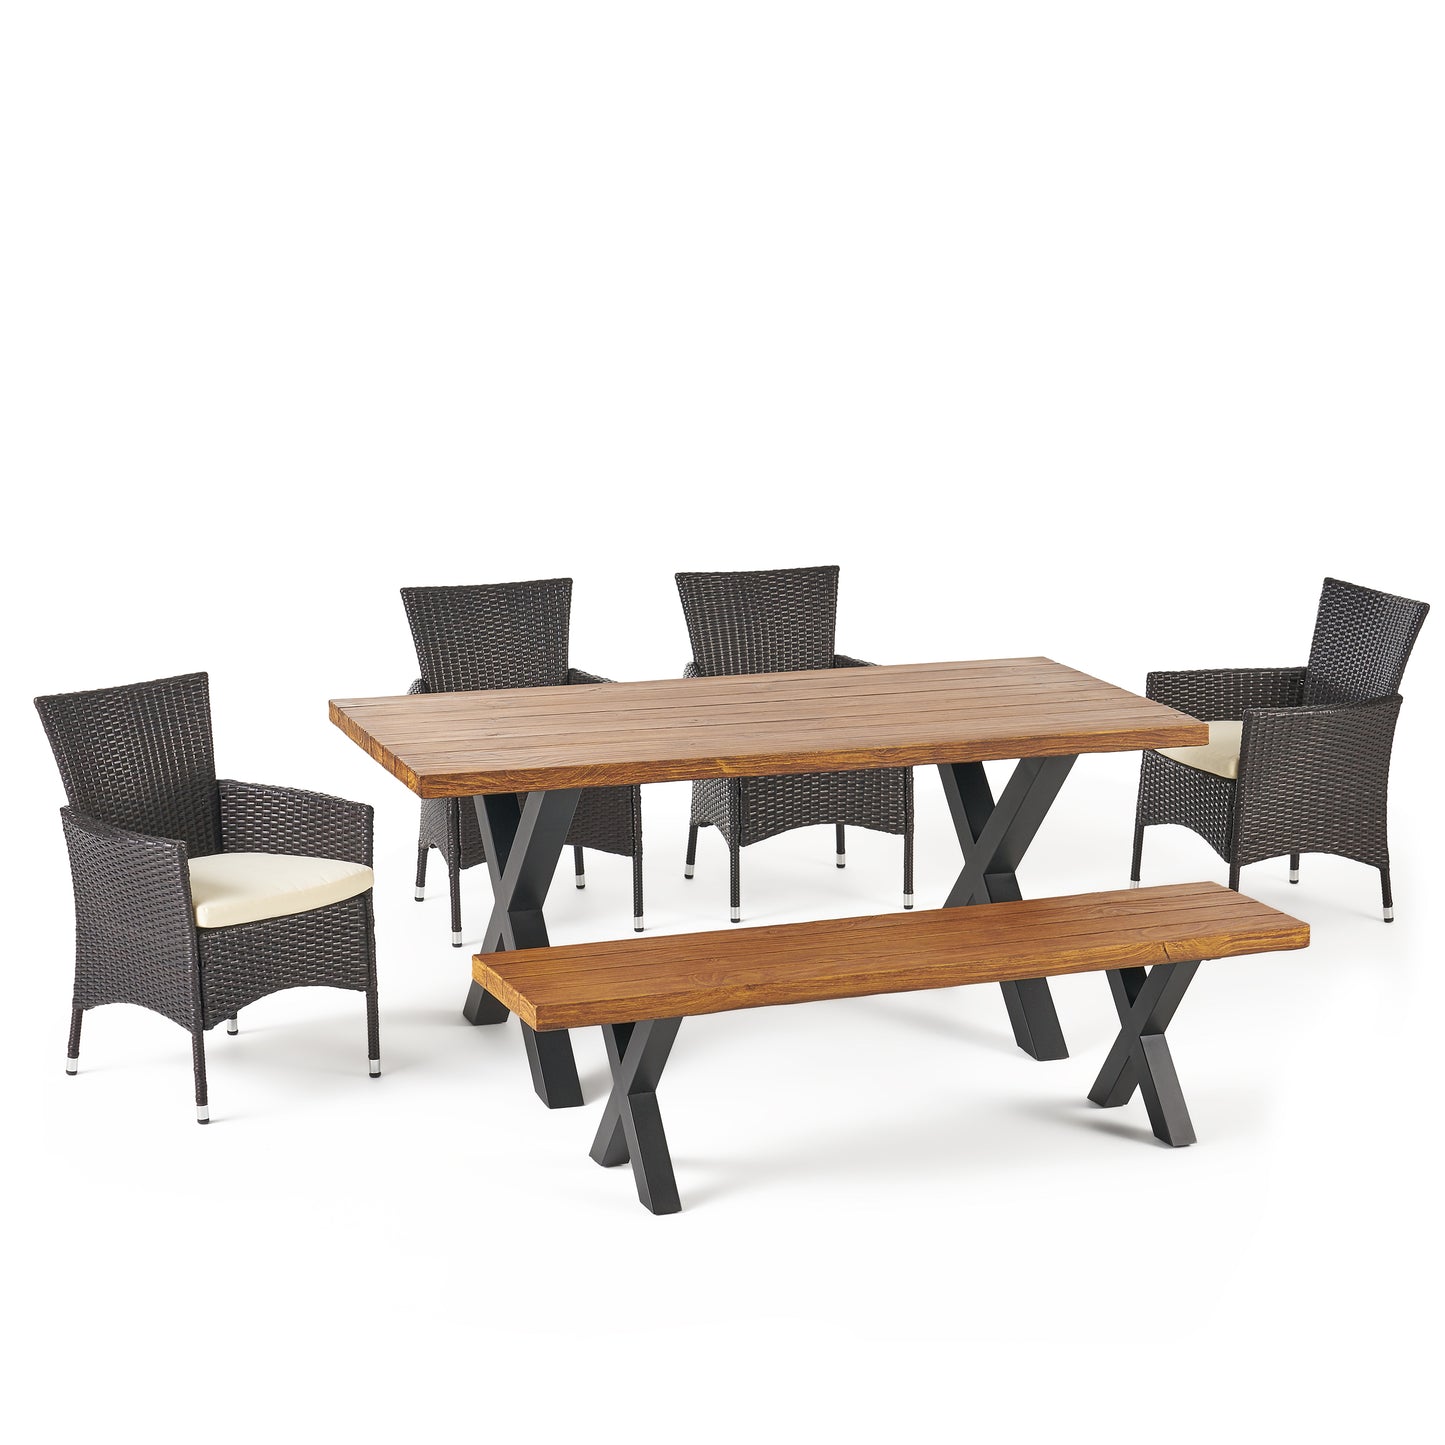 Nazareno Outdoor 6 Piece Wicker Dining Set with Concrete Table and Bench